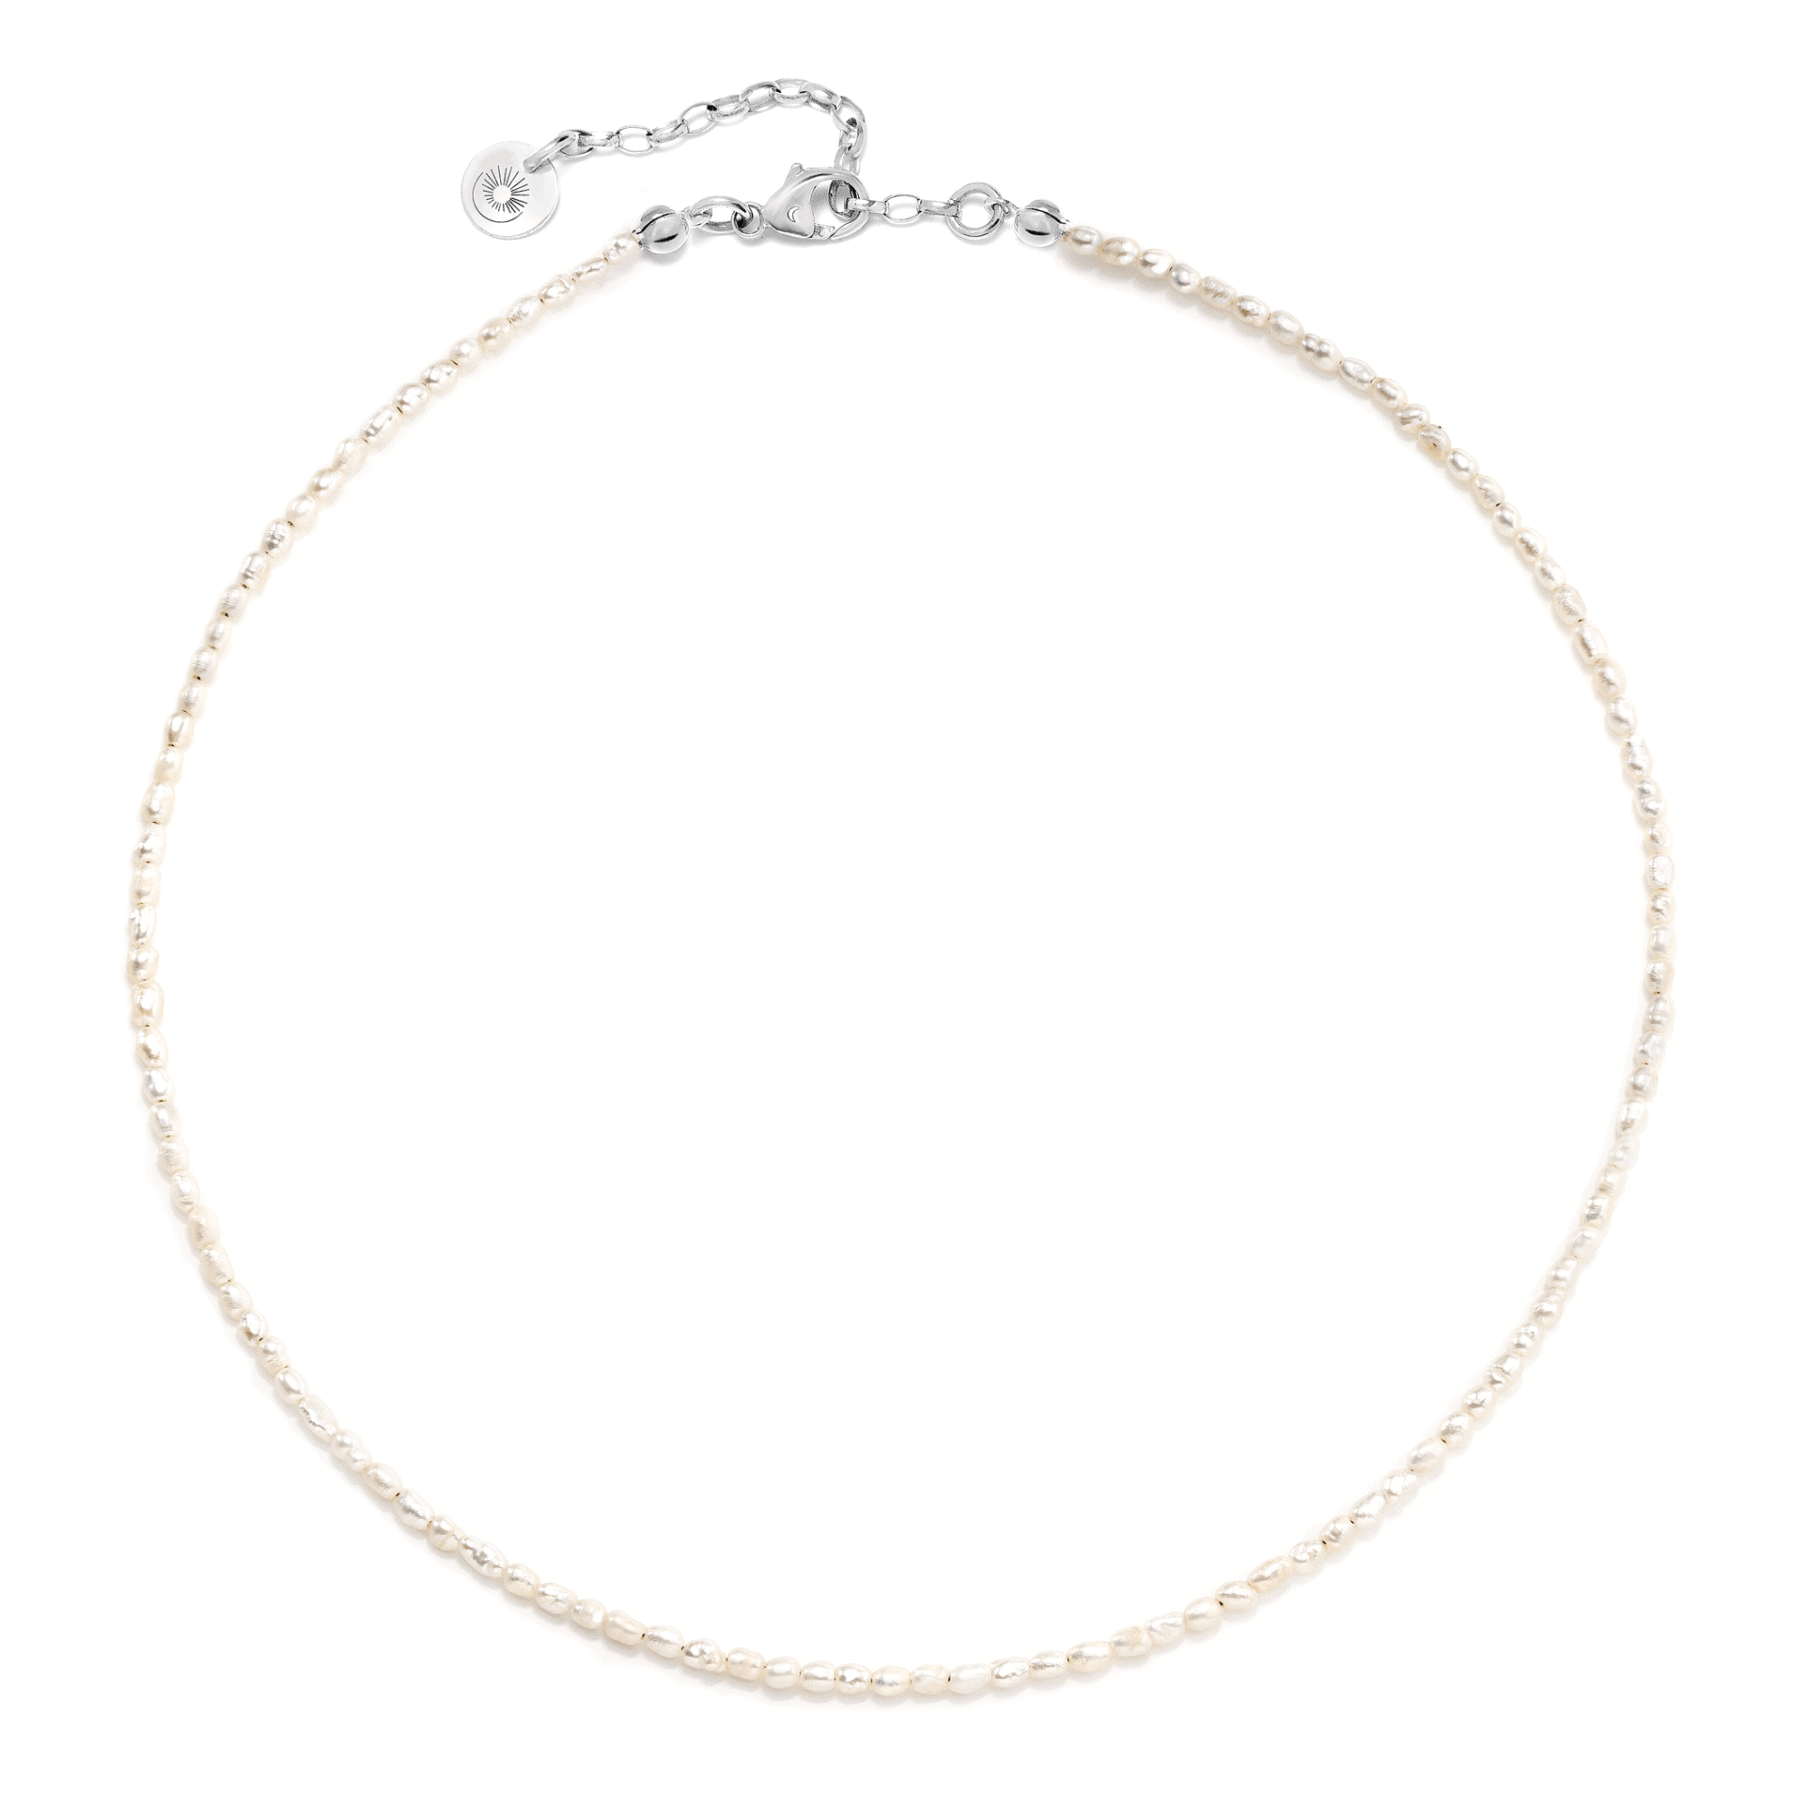 Pearl necklace choker with silver elements